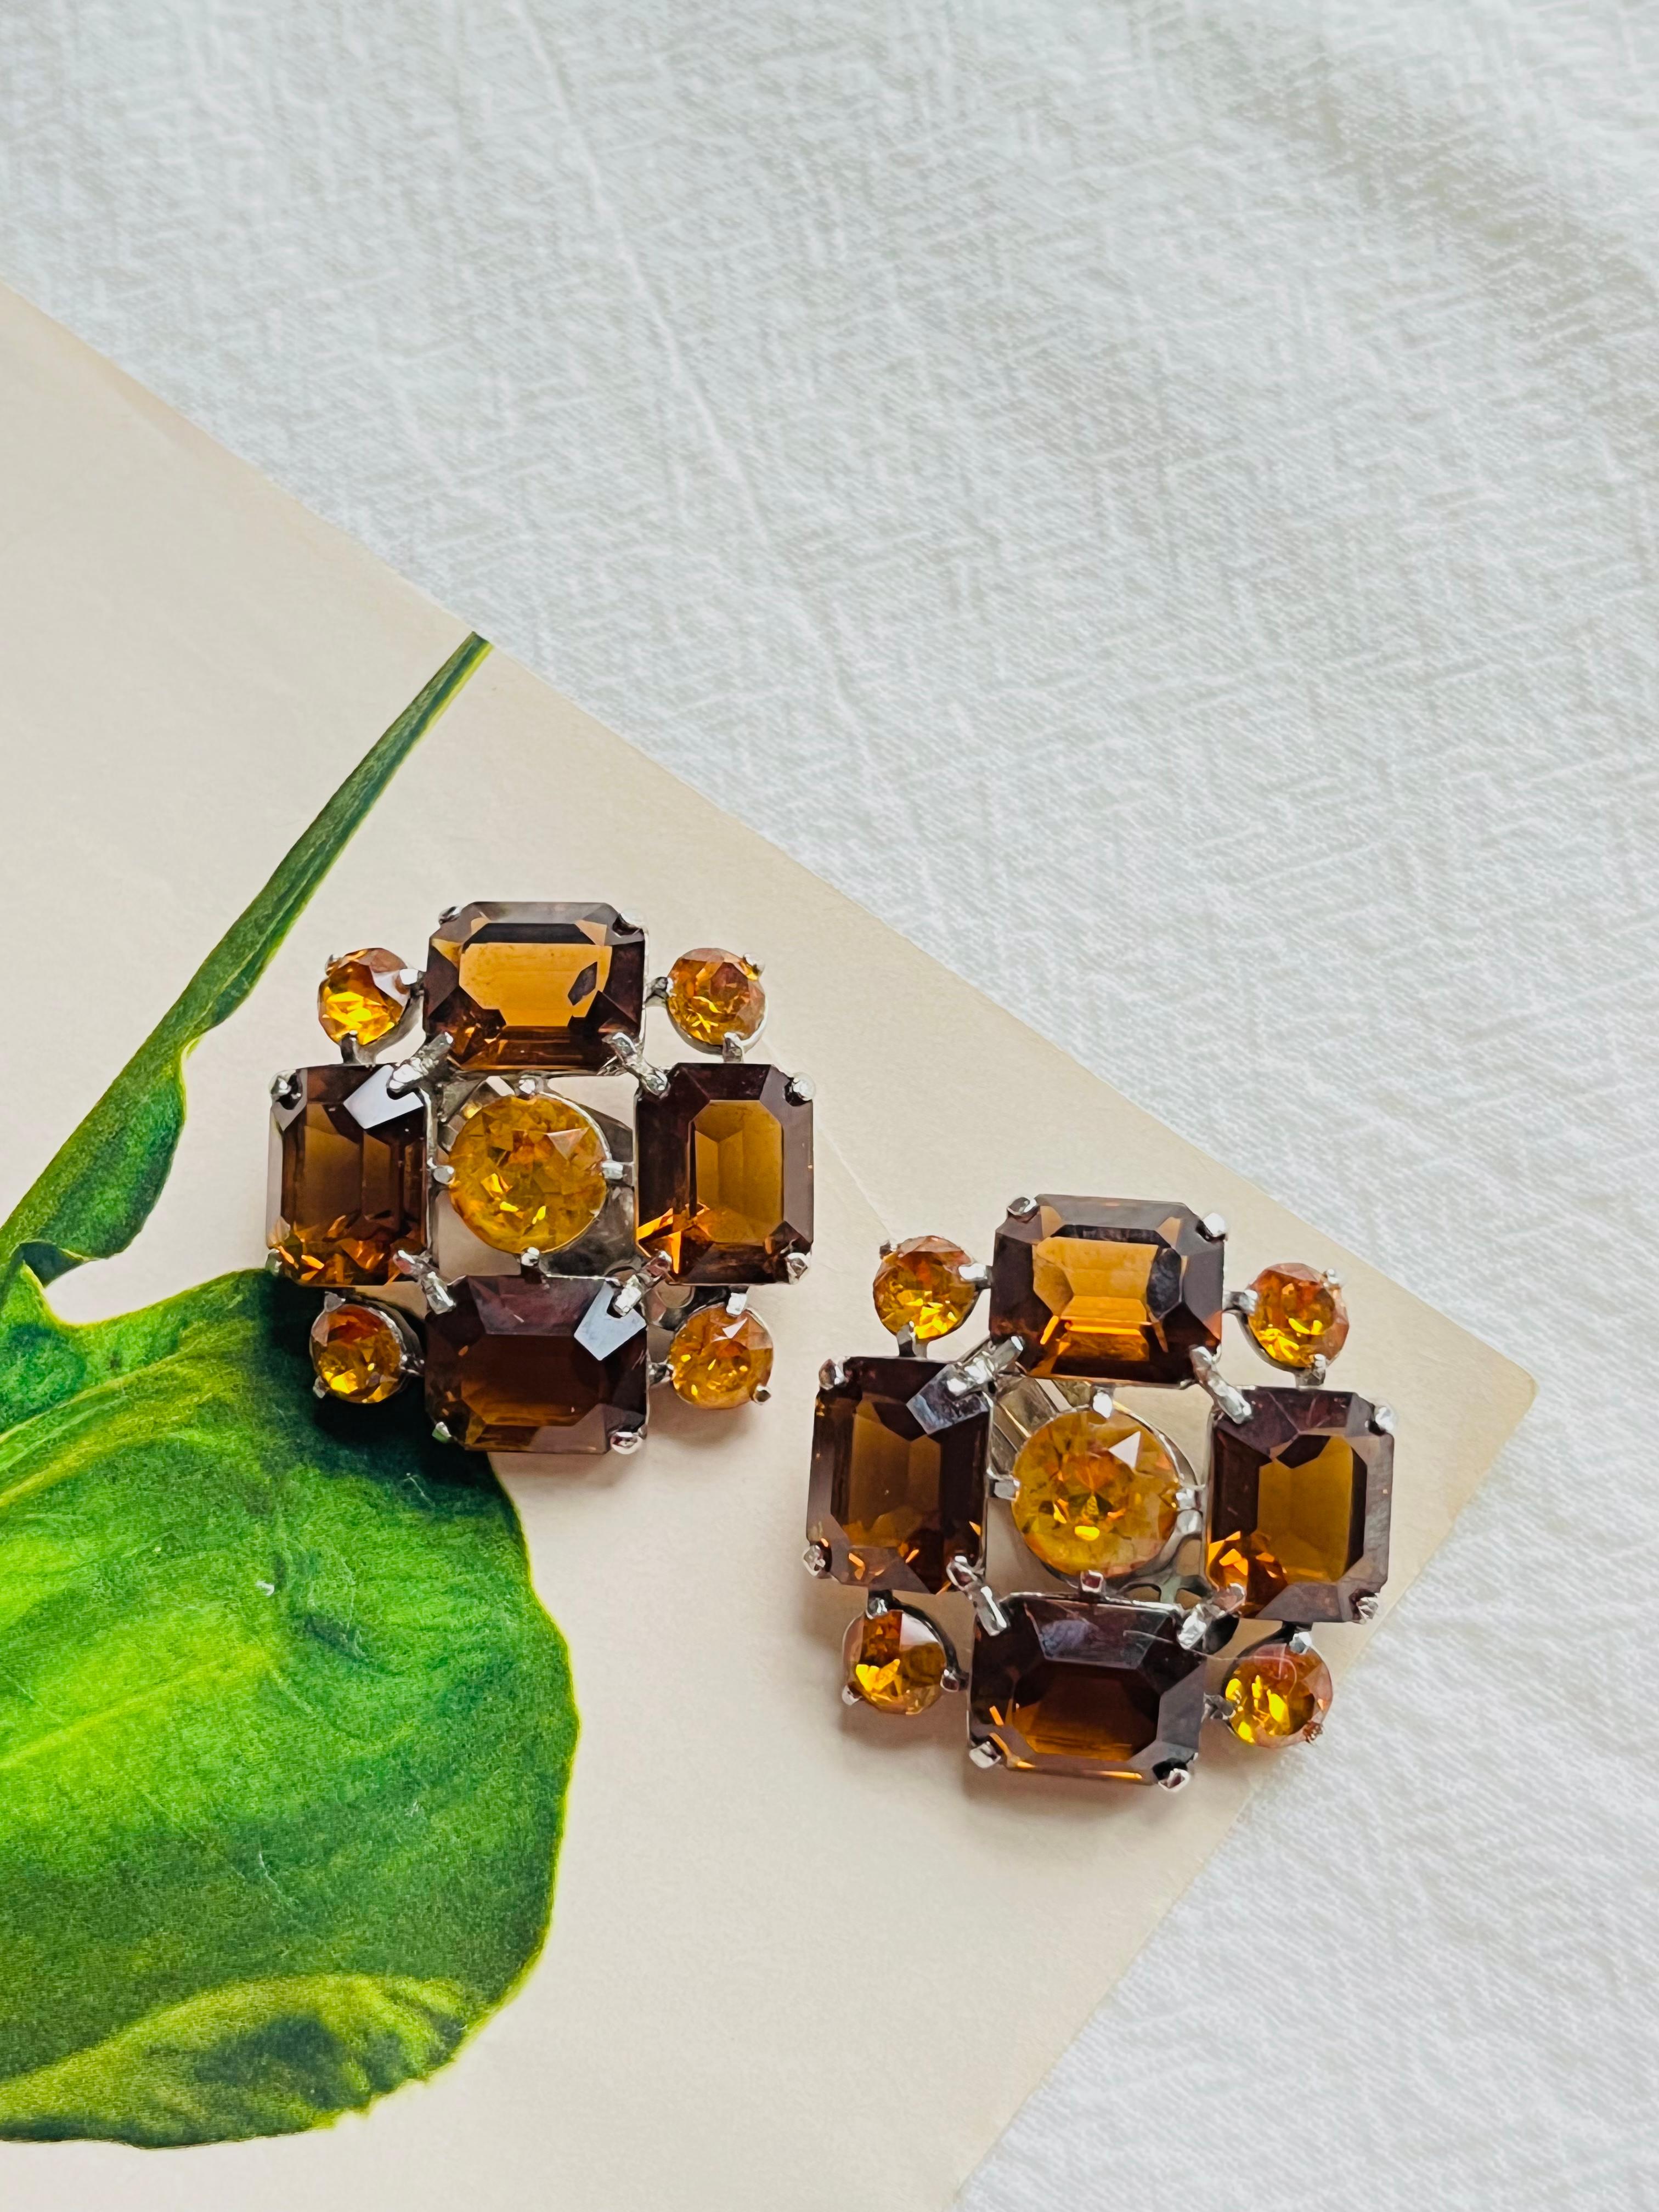 Christian Dior by Mitchel Maer 1950s Vintage Citrine Amber Flower Crystals Clip Earrings, Silver Tone

Mitchel Maer was a prominent American designer who lived in England during the 1950s. During this time, he created jewellery under his own name